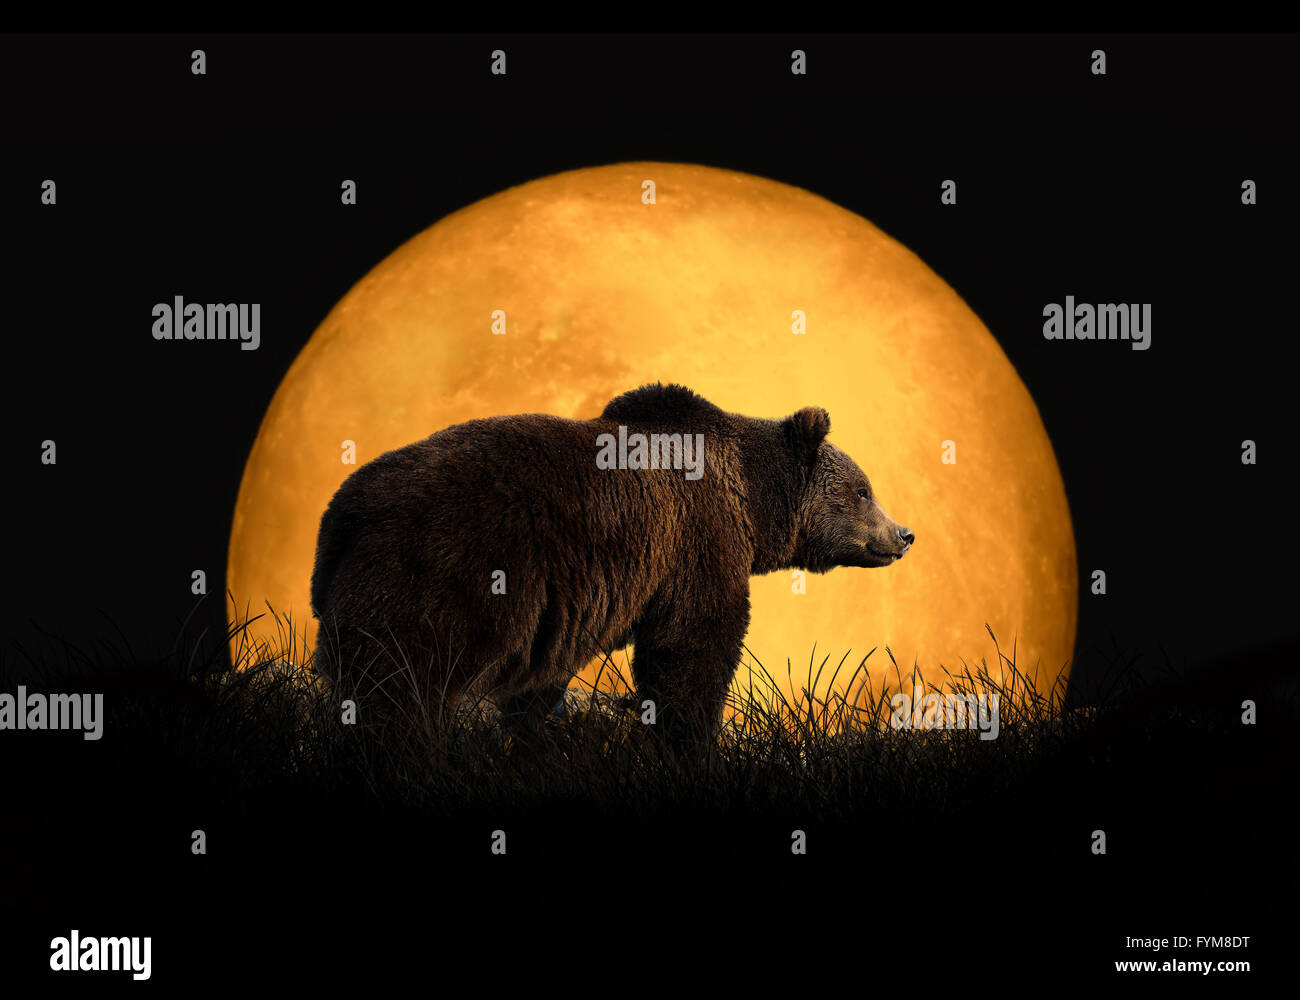 Bear on the background of red moon. Large moon on a dark background Stock Photo